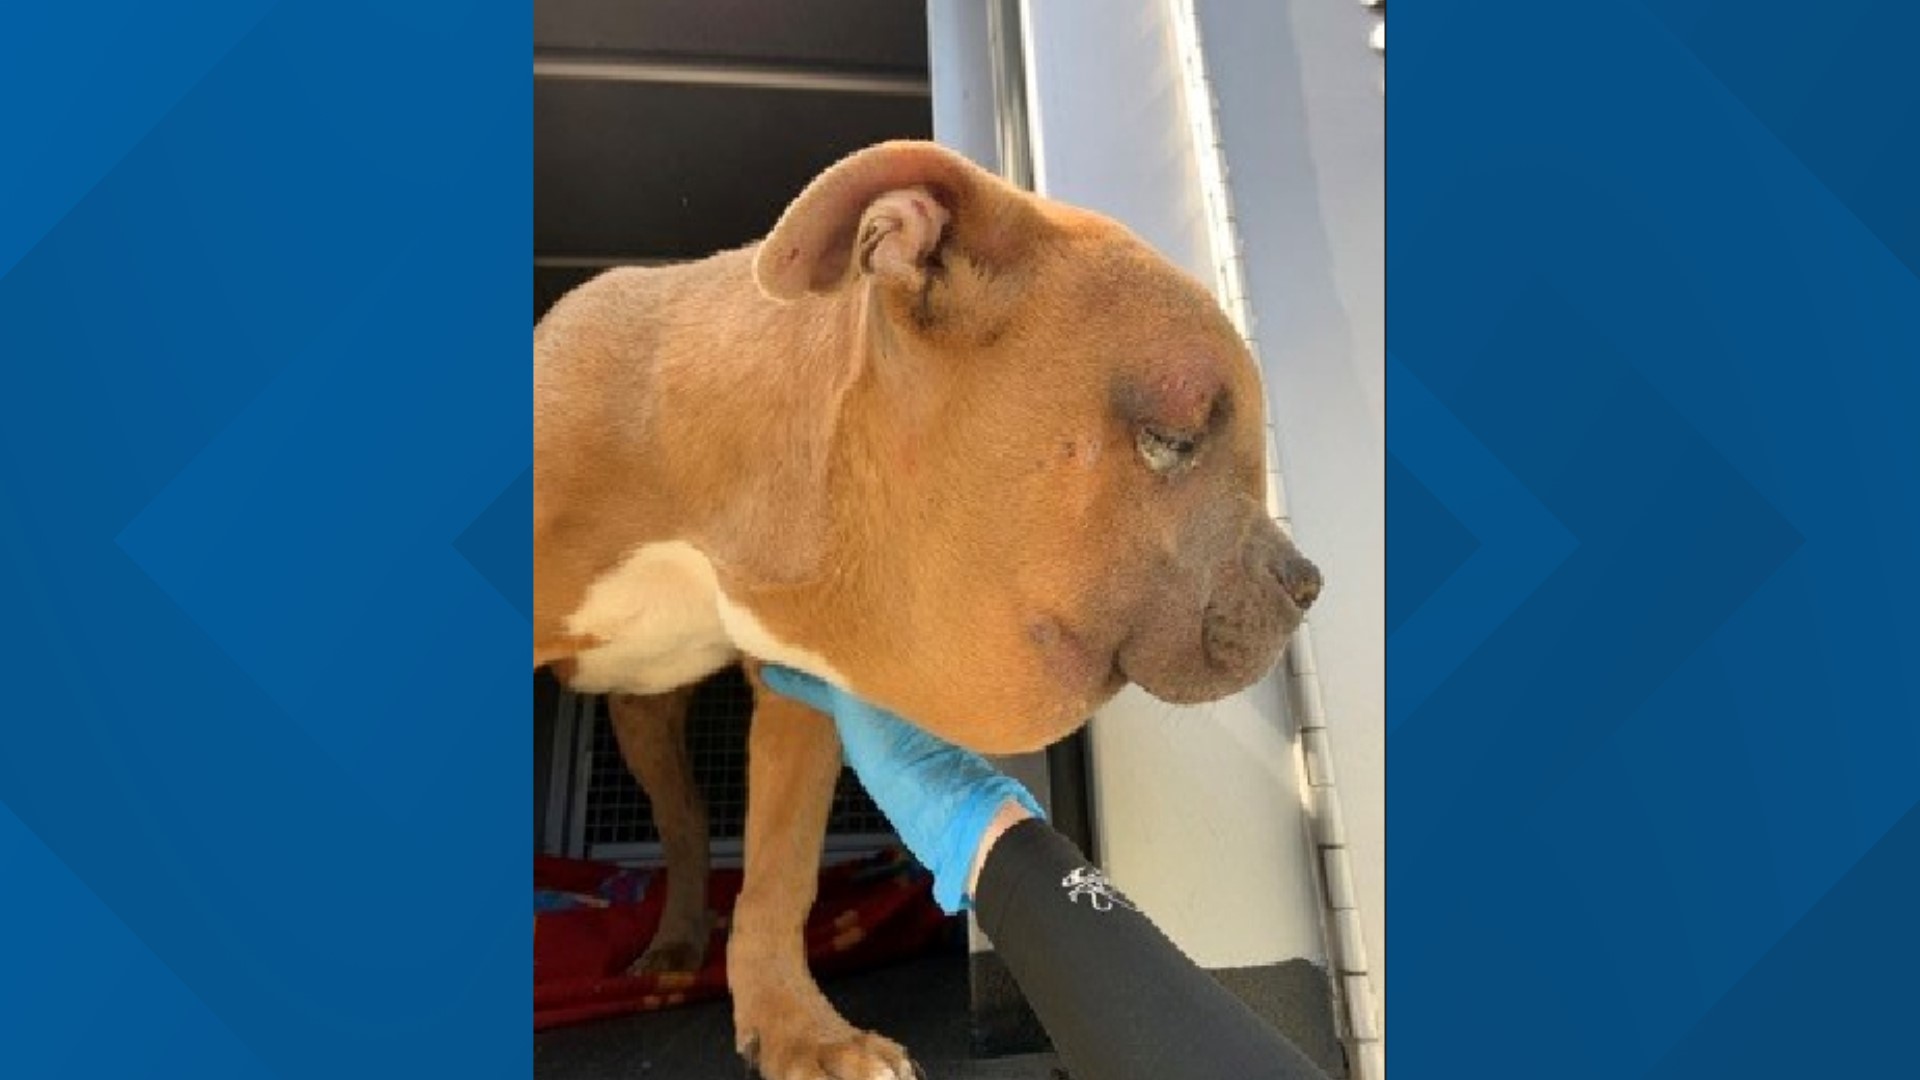 The pit bull was found severely injured near Seattle's Pritchard Beach Park on April 14. He is still recovering from his wounds and trauma.